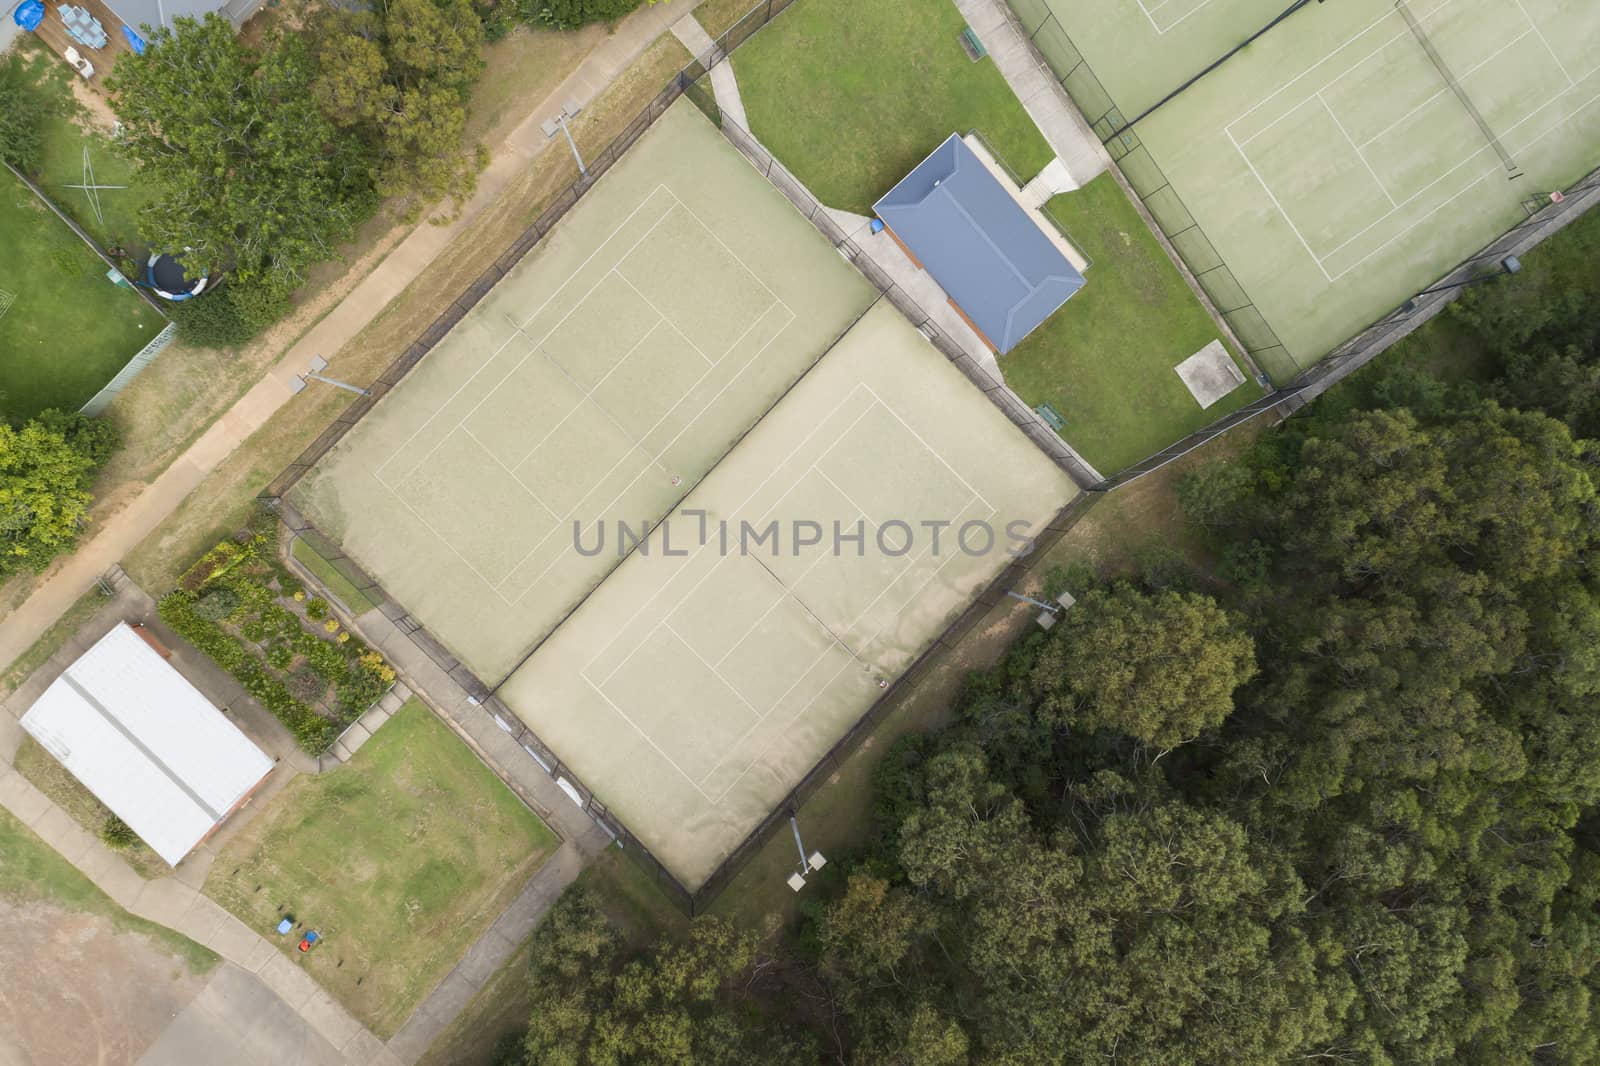 An aerial view of a tennis court in a small regional town by WittkePhotos